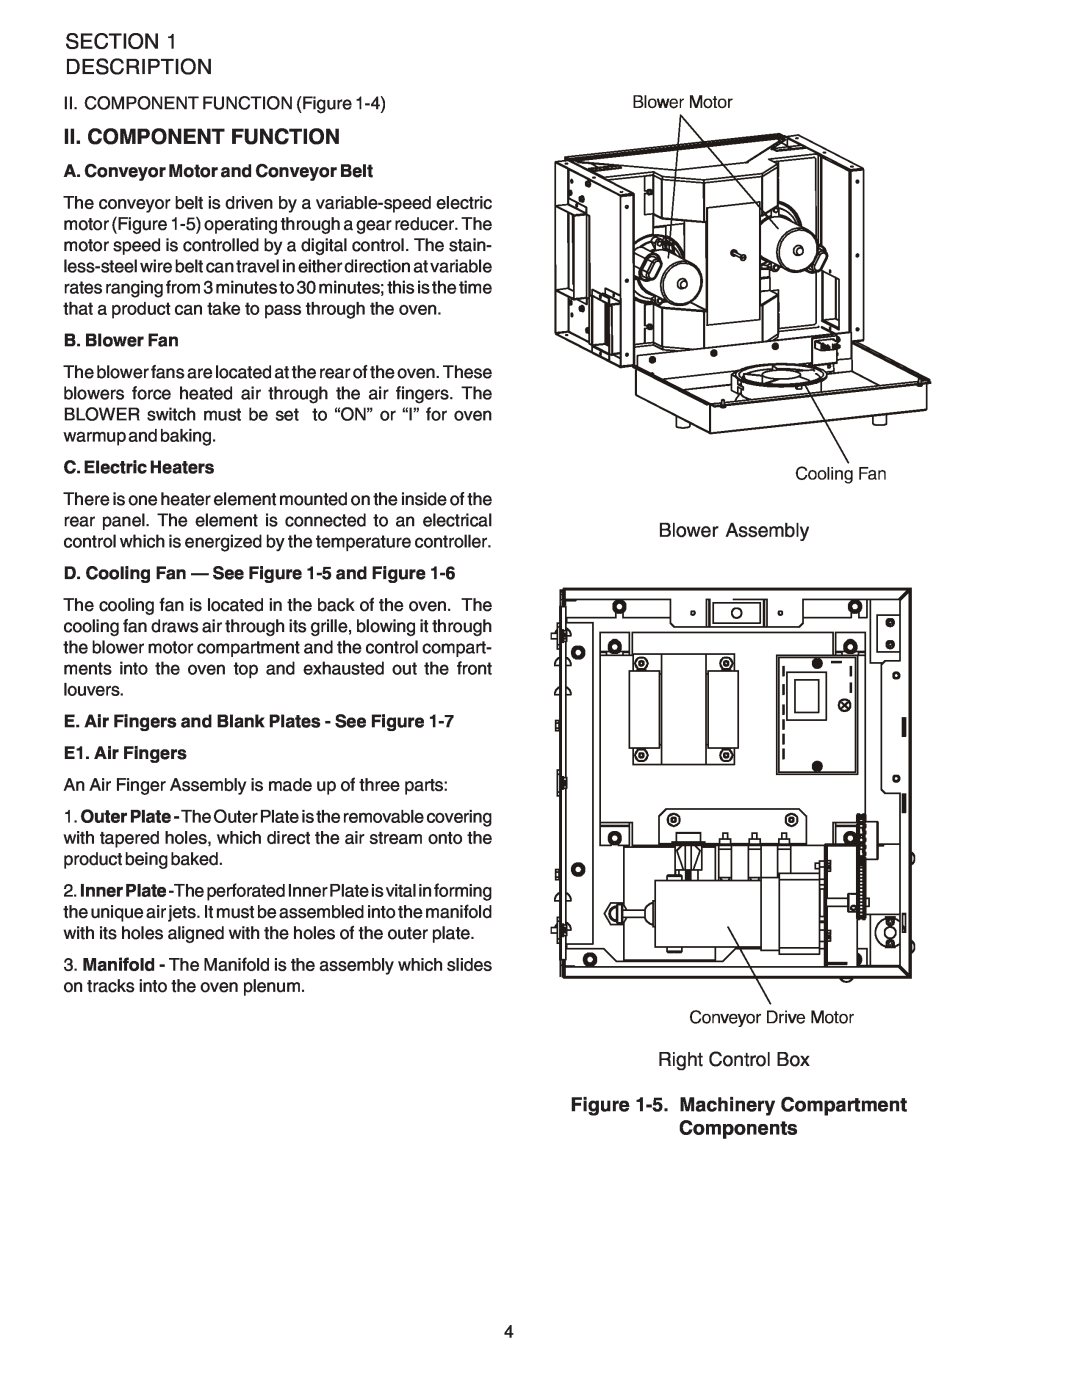 Middleby Marshall PS520 Section Description, Ii. Component Function, Blower Assembly Right Control Box, B. Blower Fan 